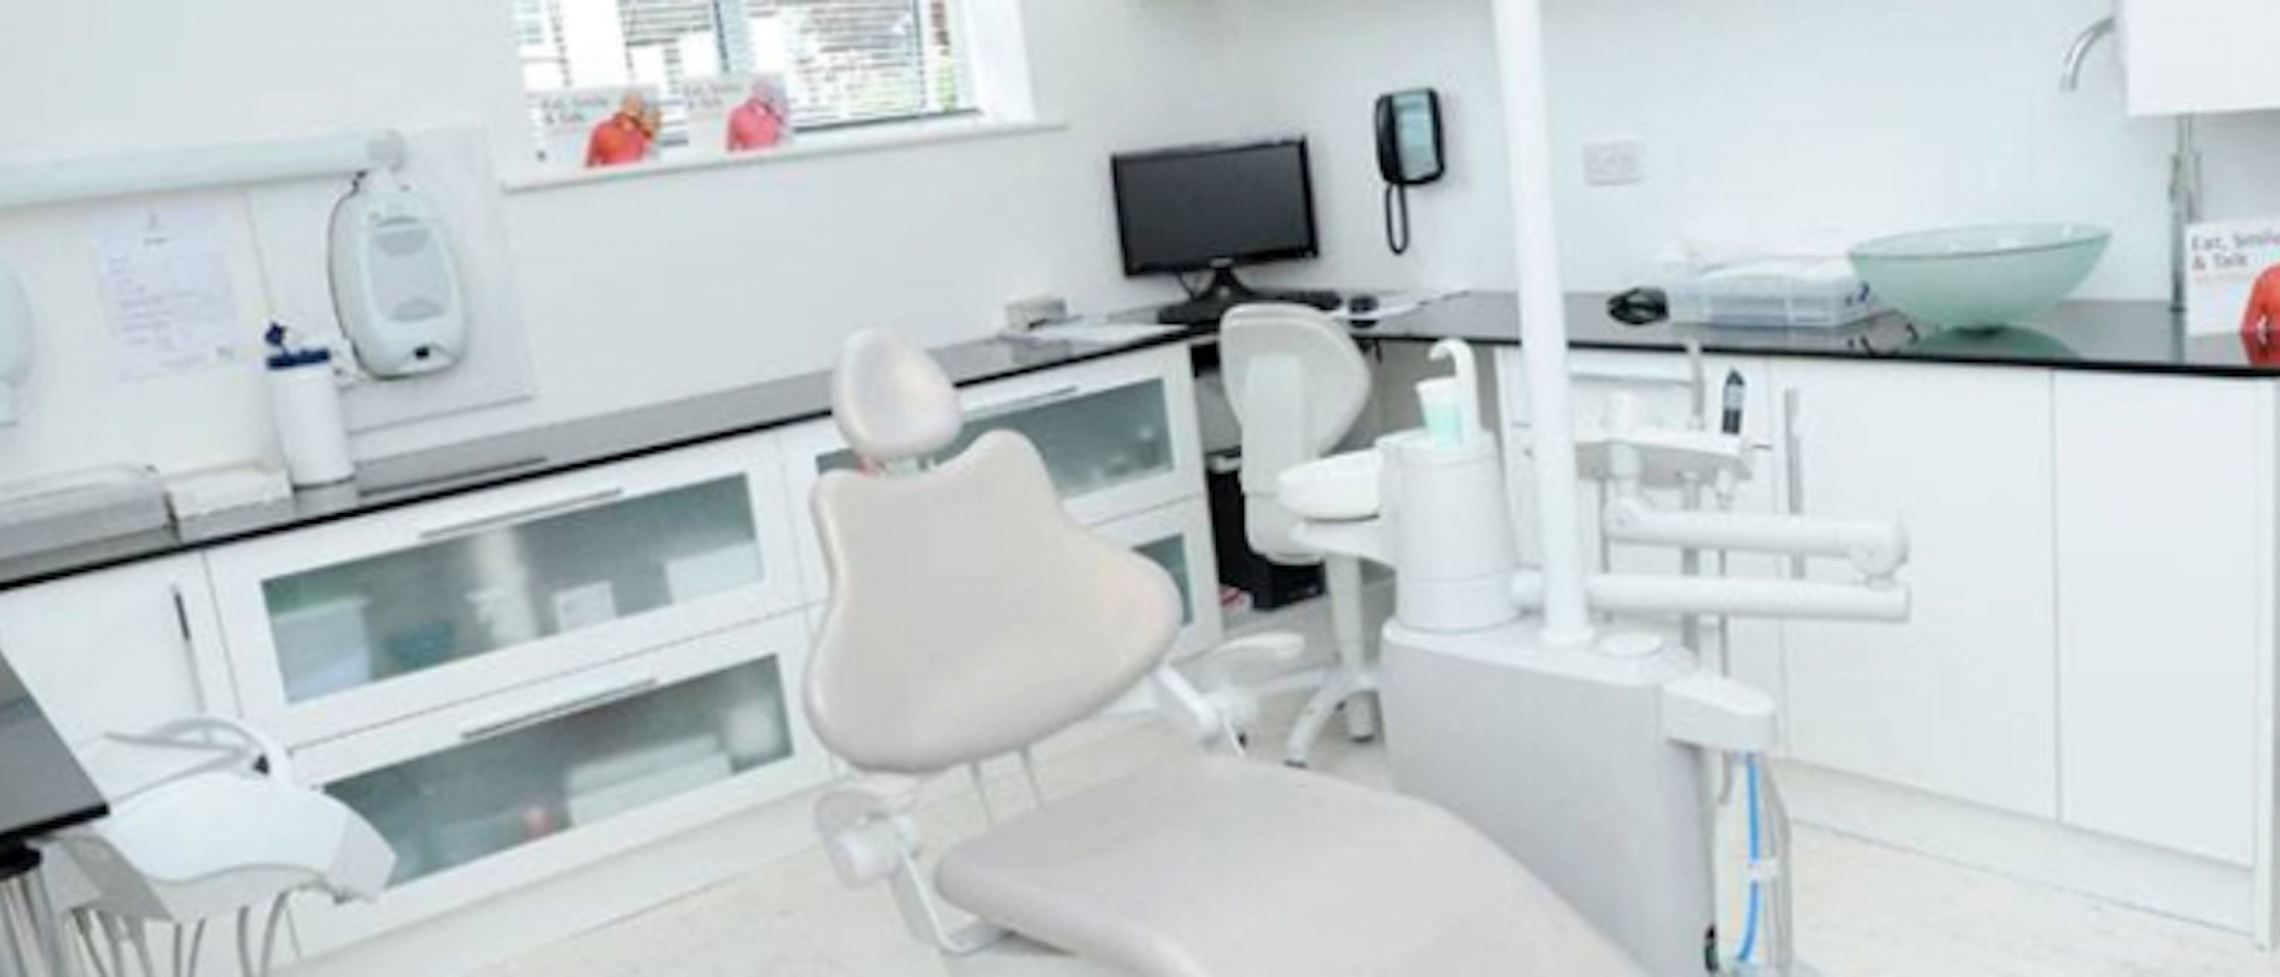 Our state-of-the-art consultation room